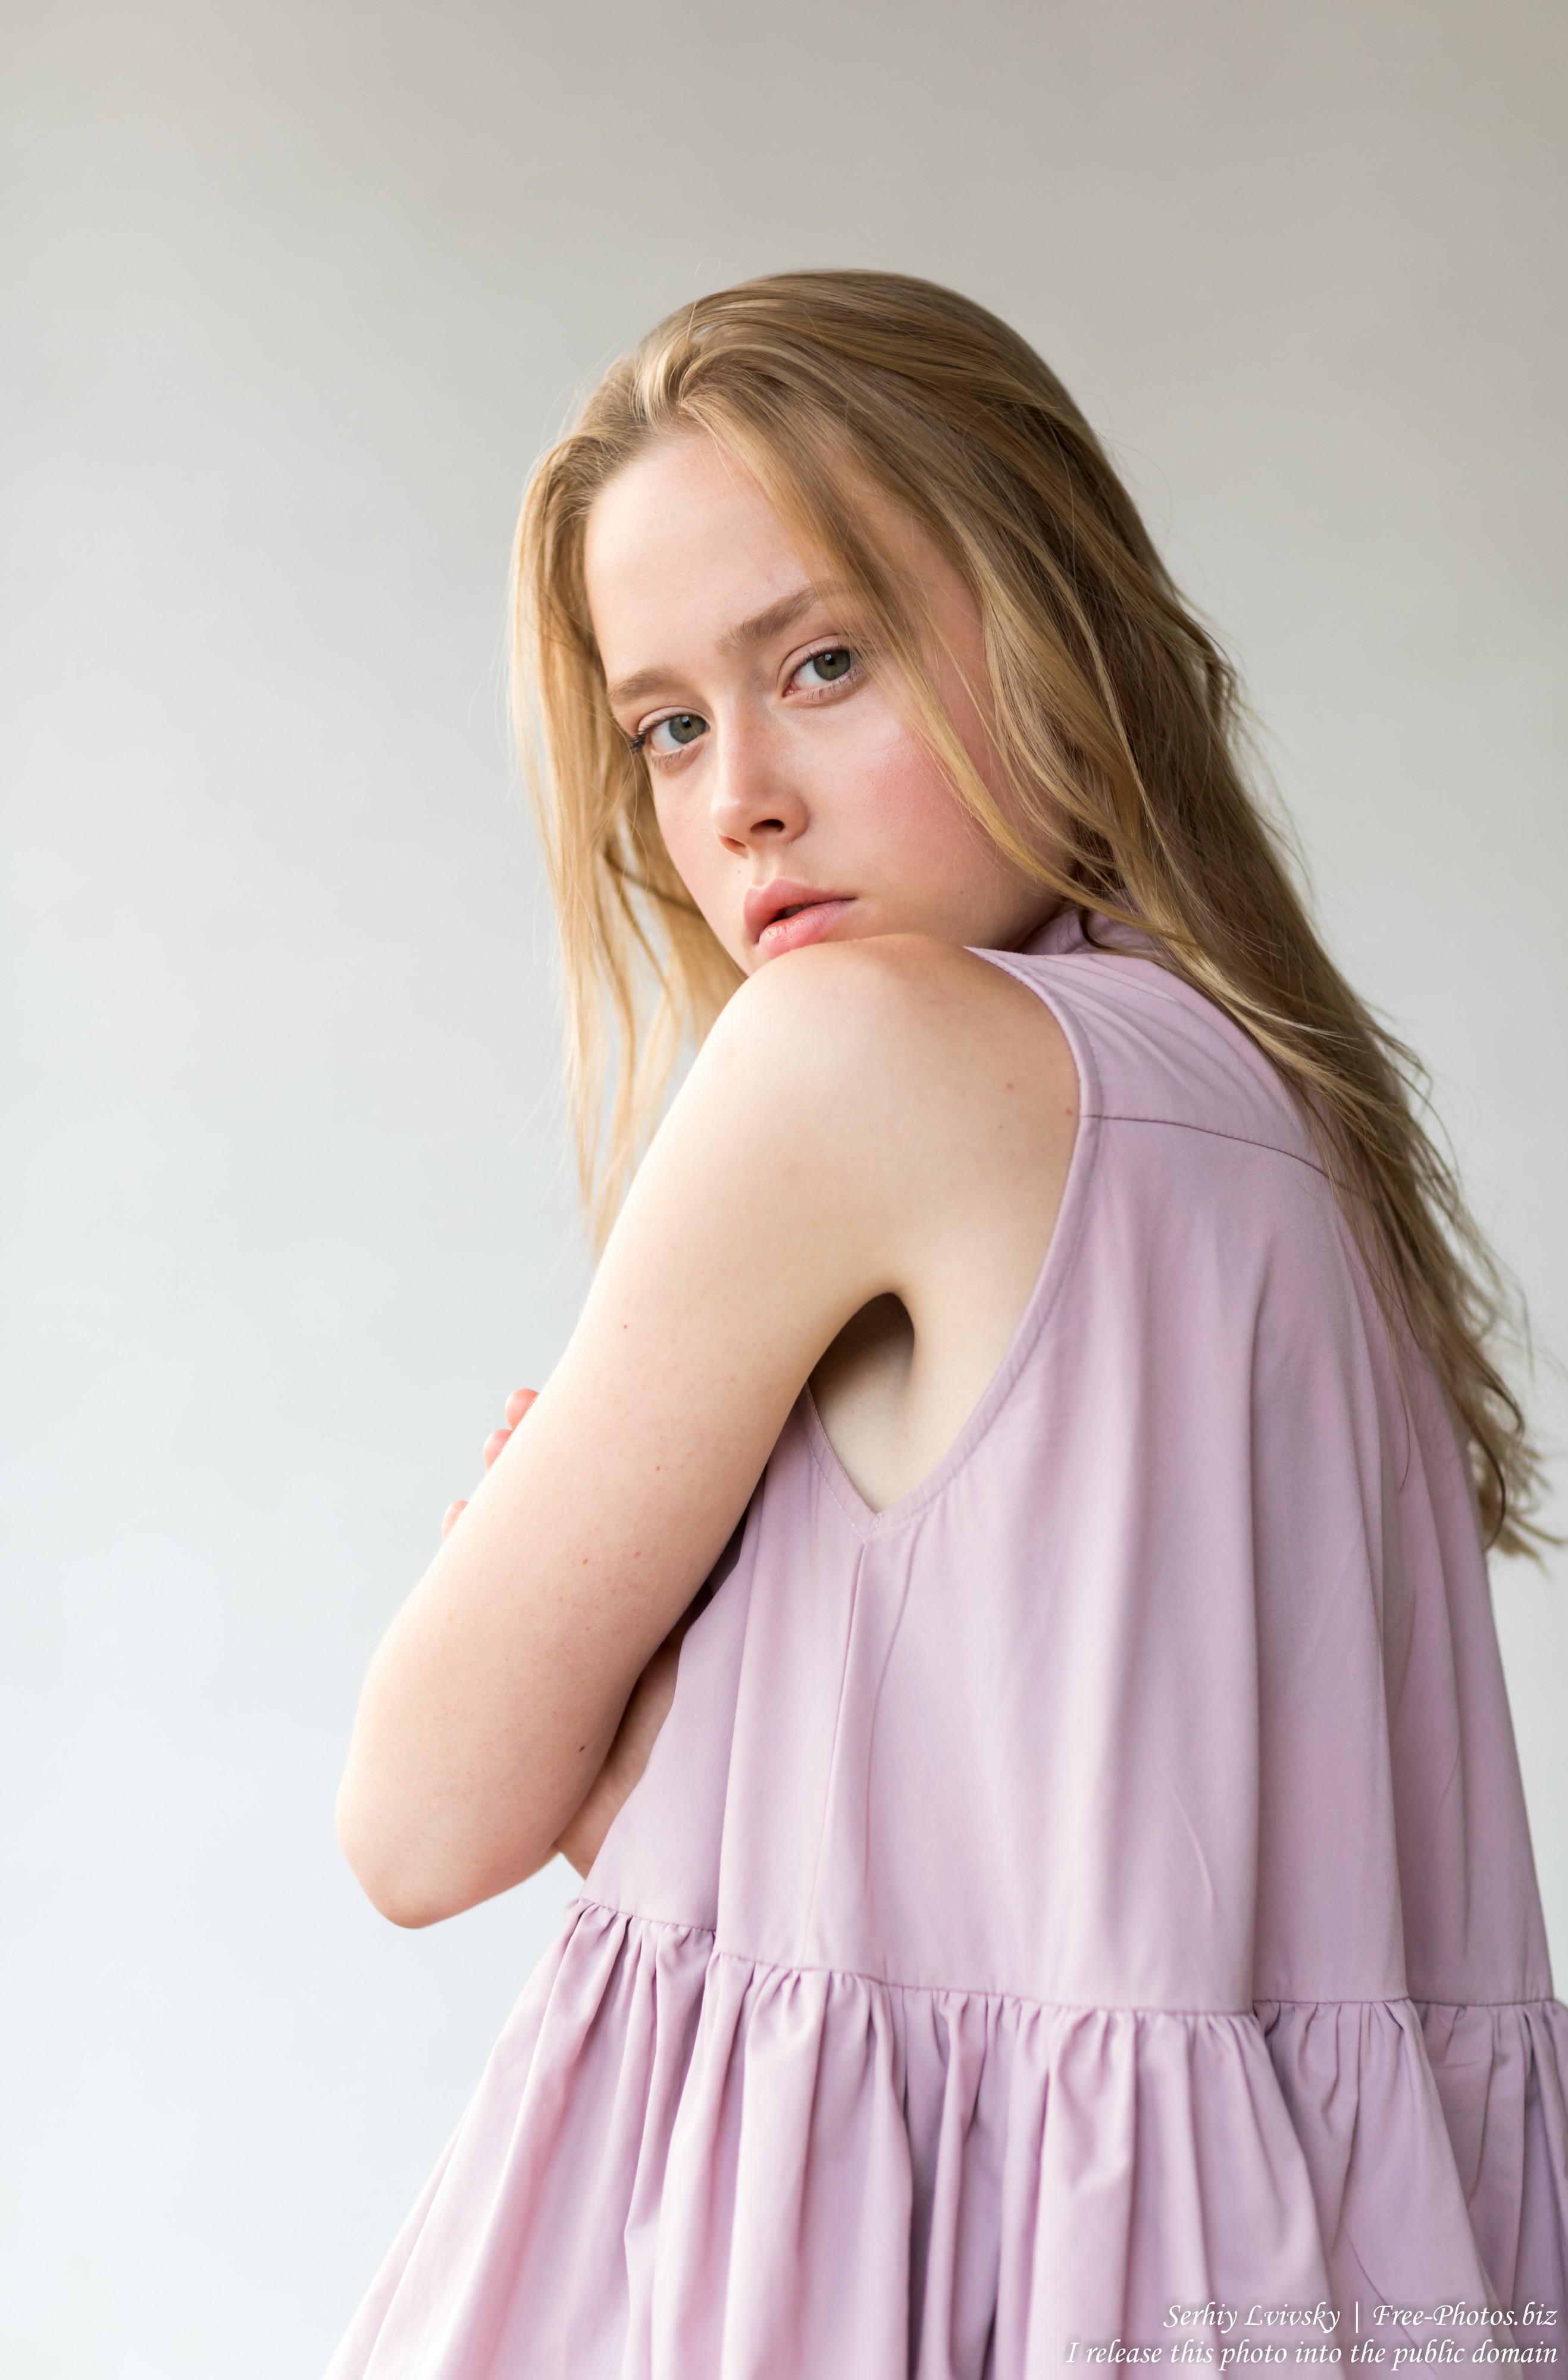 Photo Of Ania An 18 Year Old Natural Blonde Girl Photographed In June 2019 By Serhiy Lvivsky